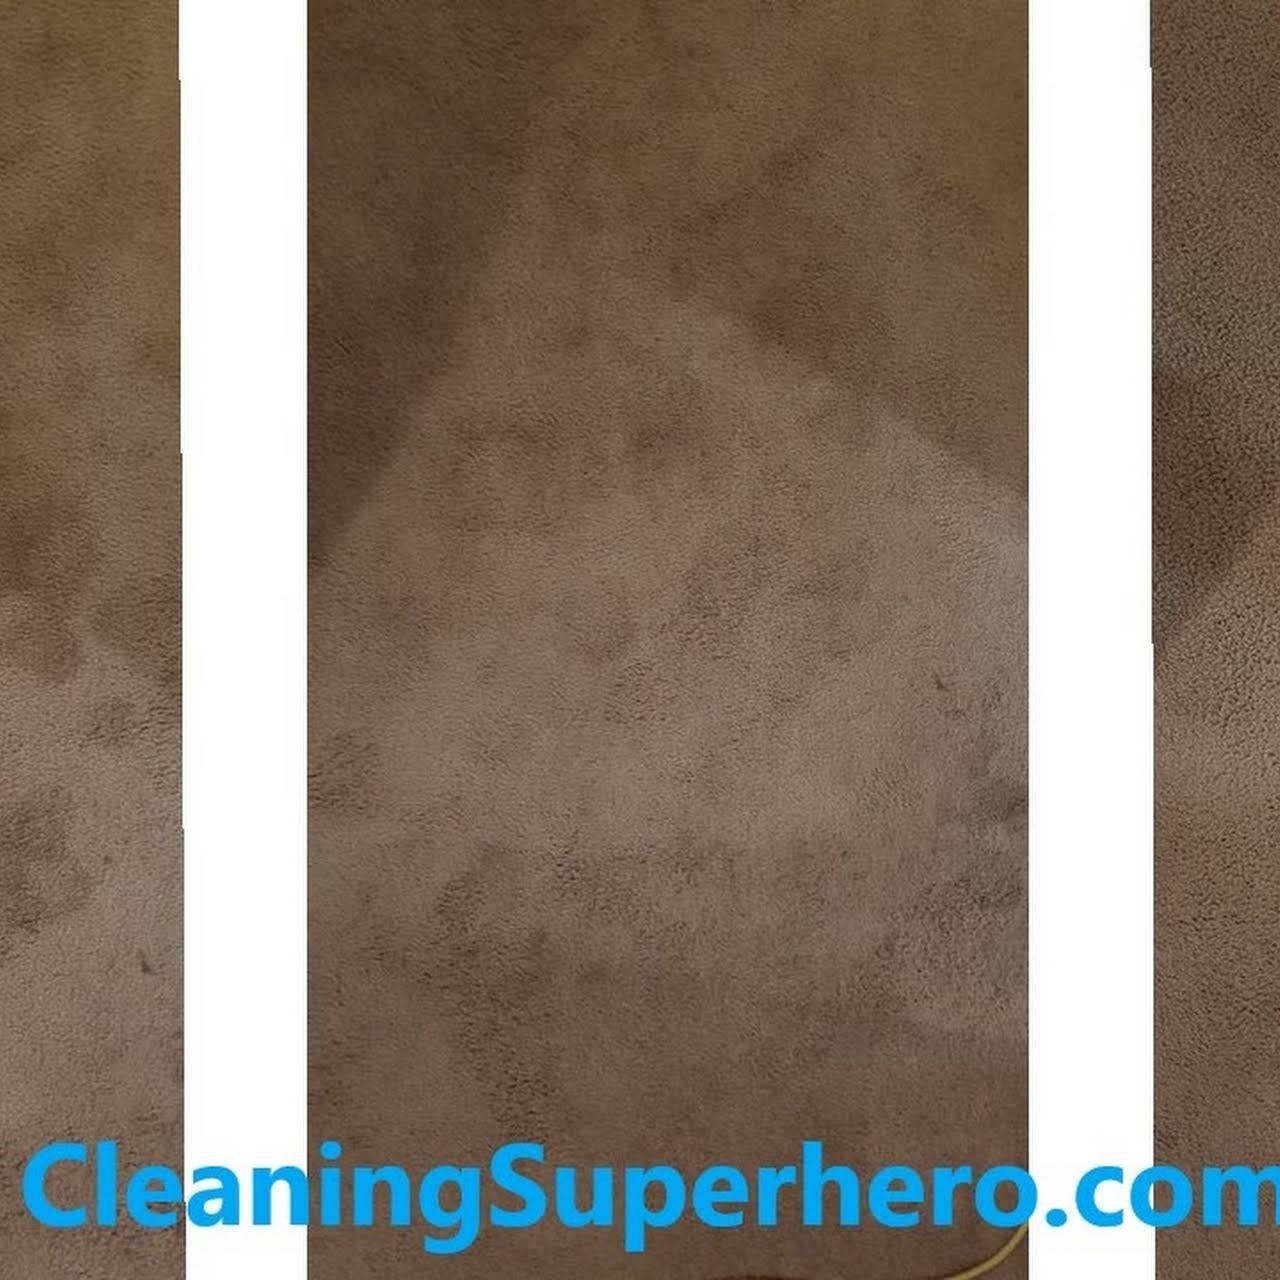 24 Famous Steam Cleaner for Hardwood Floors and Carpet 2024 free download steam cleaner for hardwood floors and carpet of cleaning superhero carpet and rug cleaning service in birmingham with pet stains and od